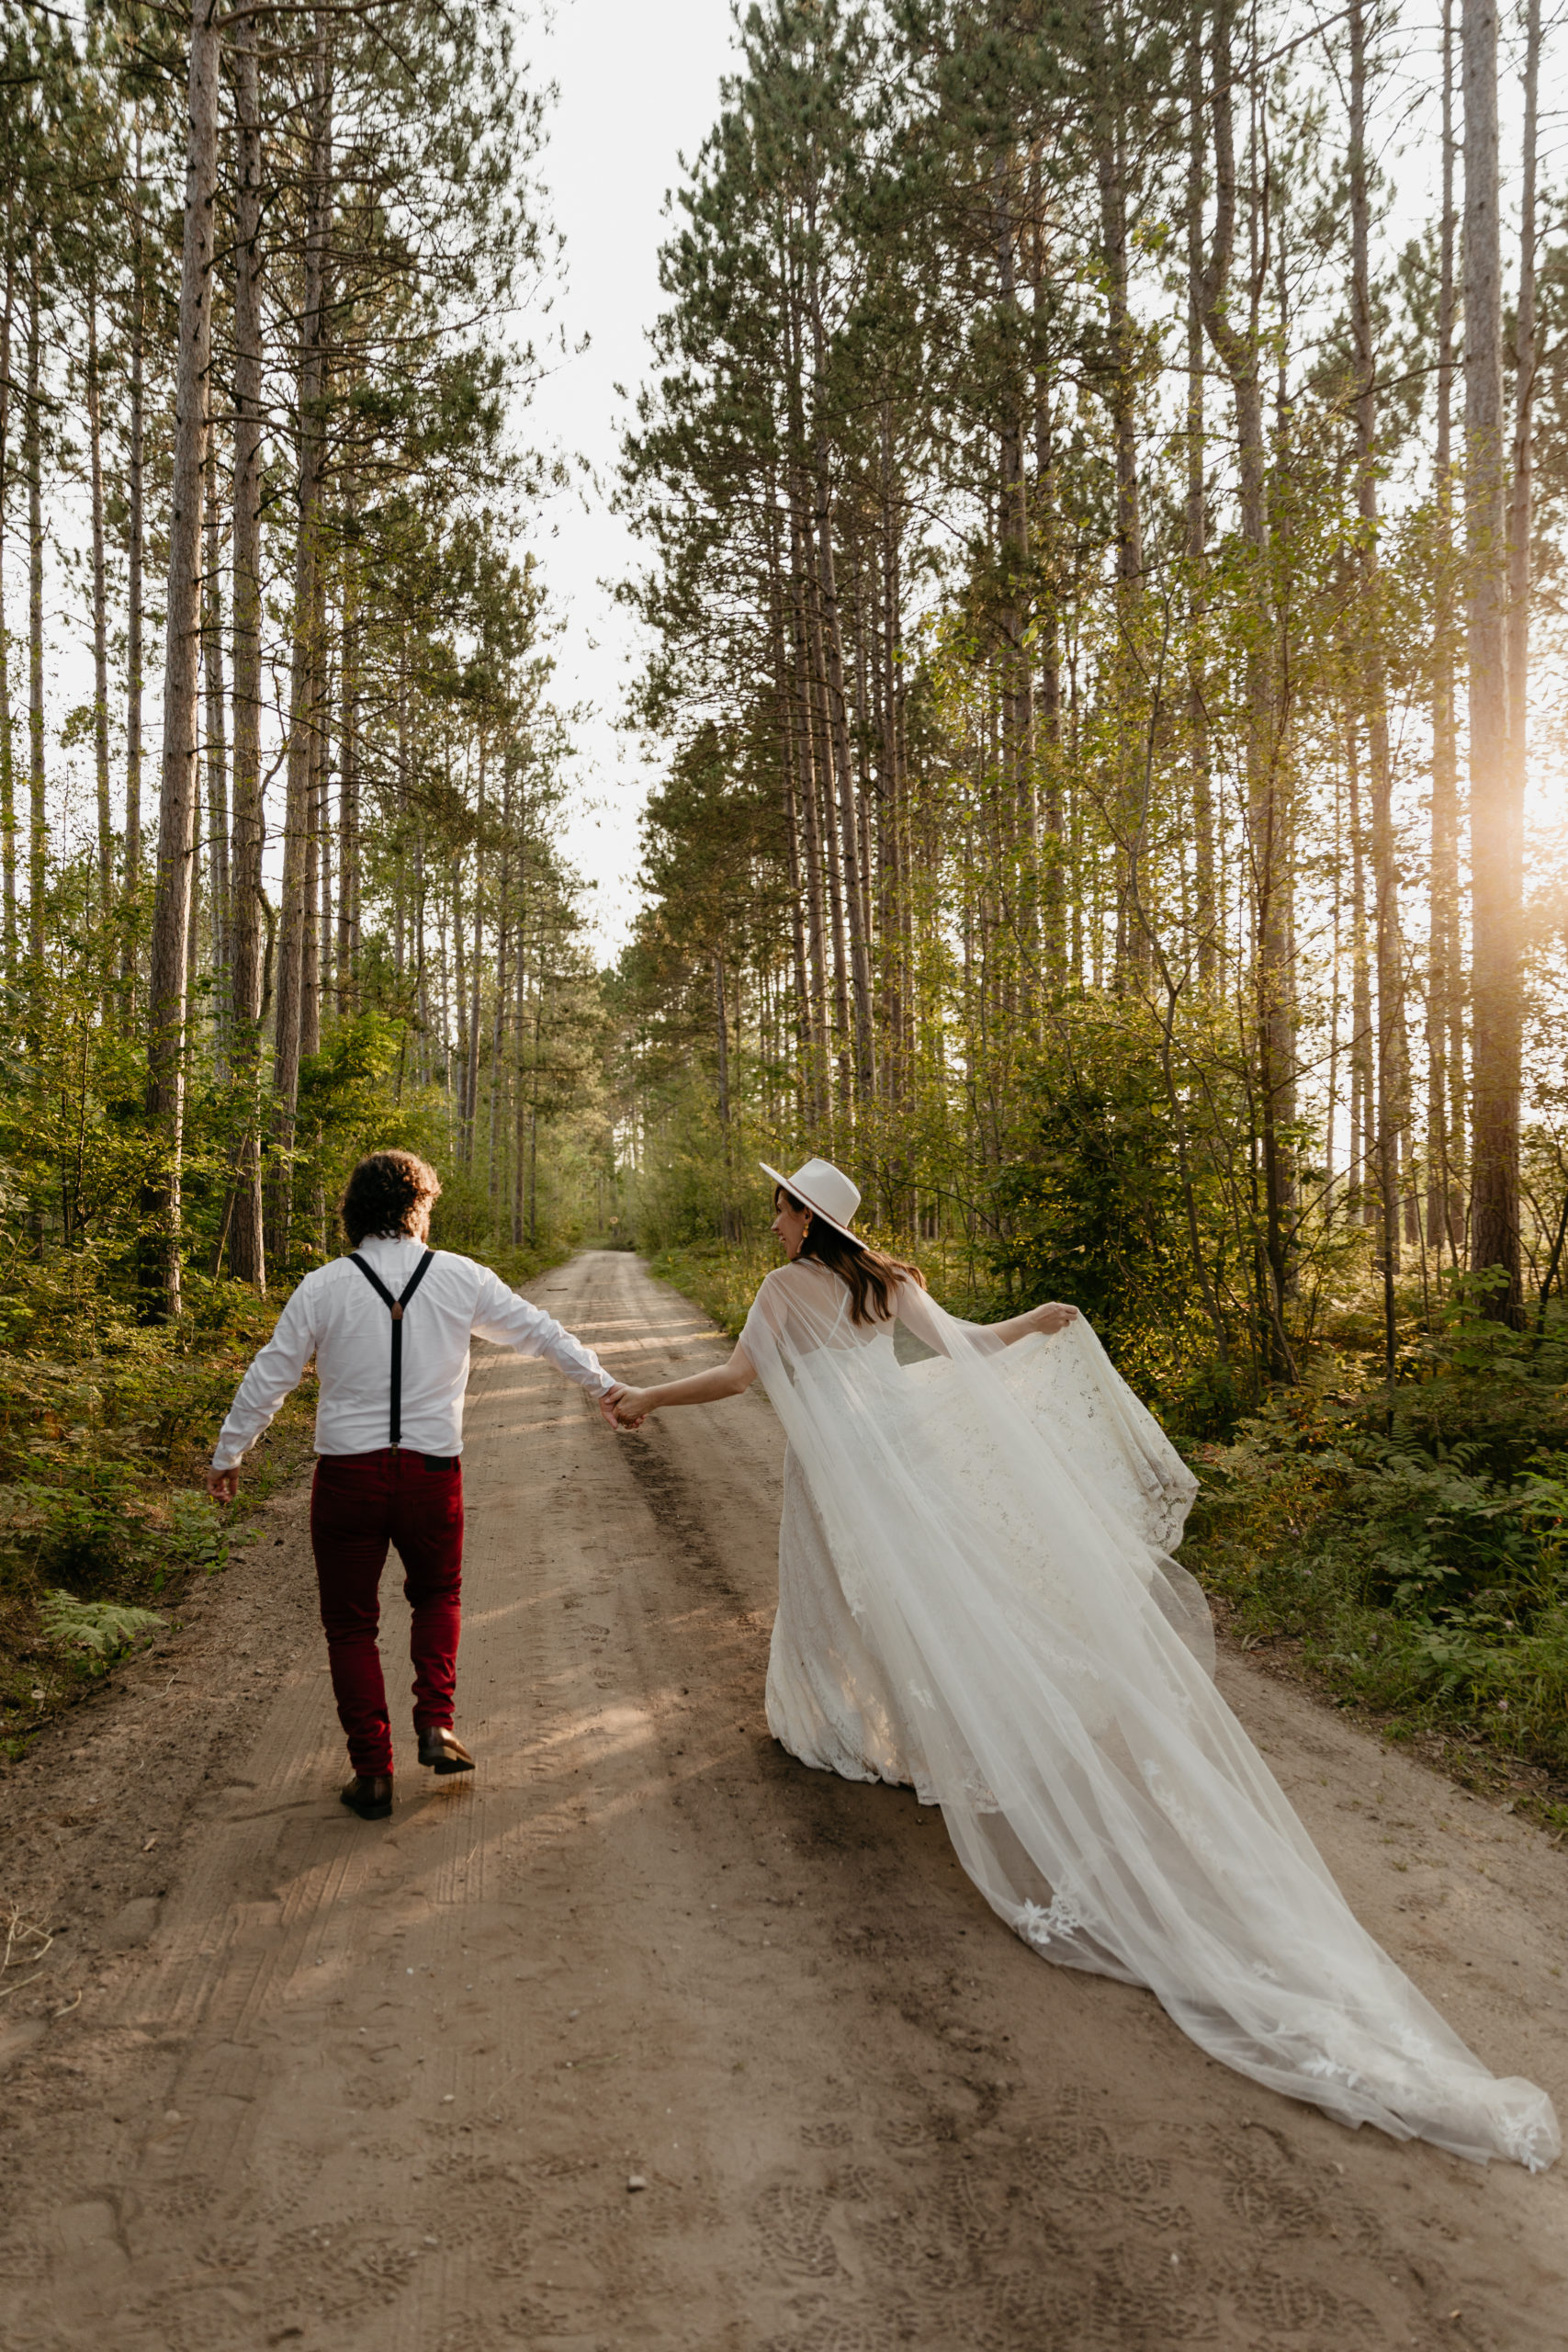 This Manistee Forest elopement in Michigan is purely magical